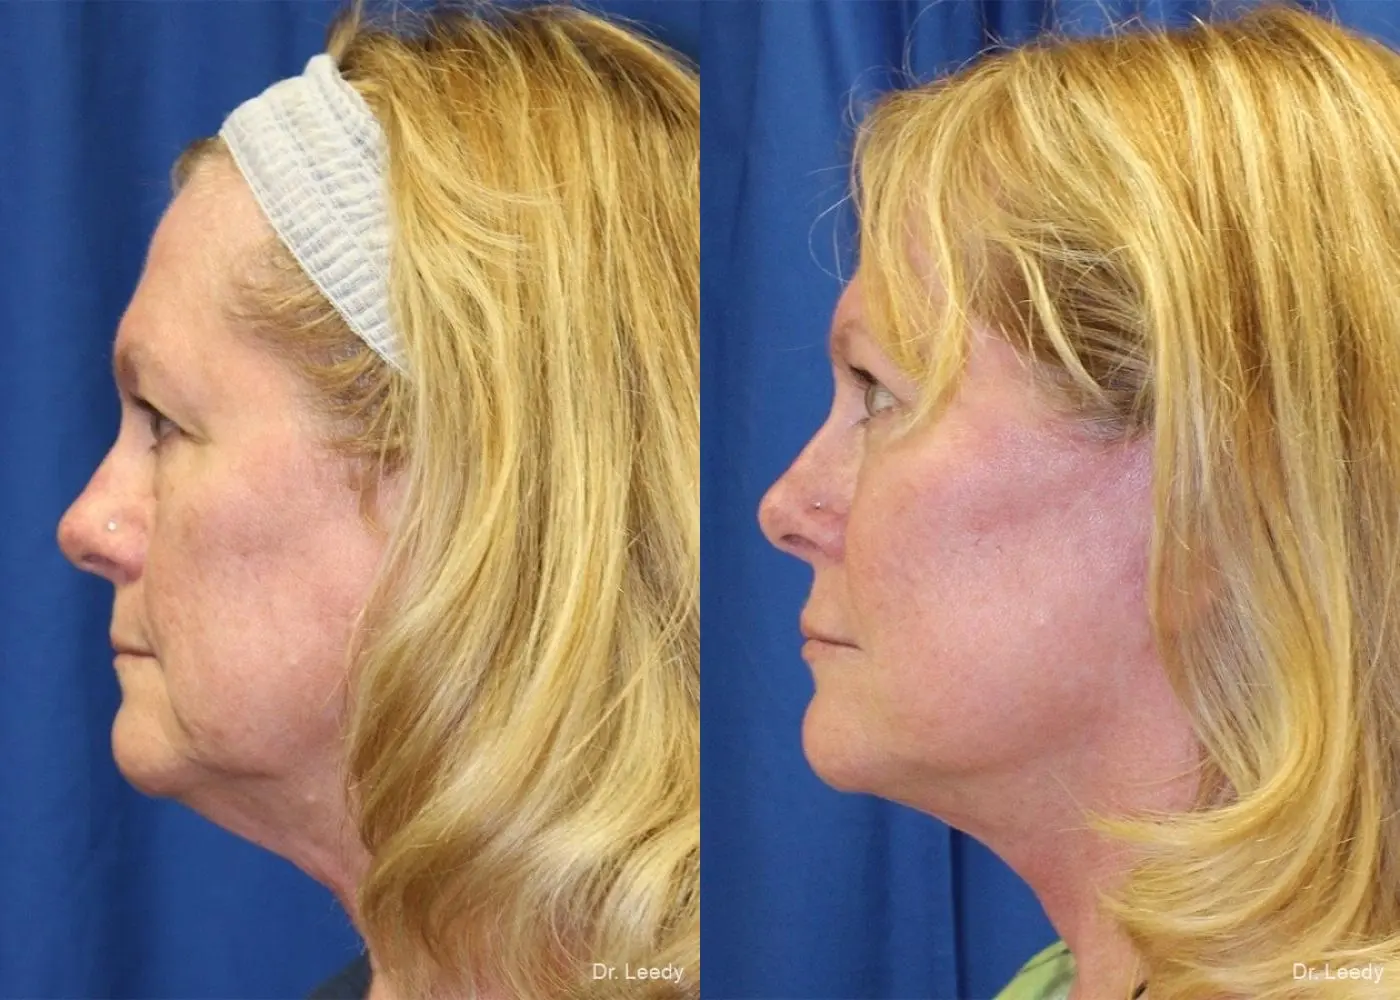 Upper Blepharoplasty: Patient 1 - Before and After 5